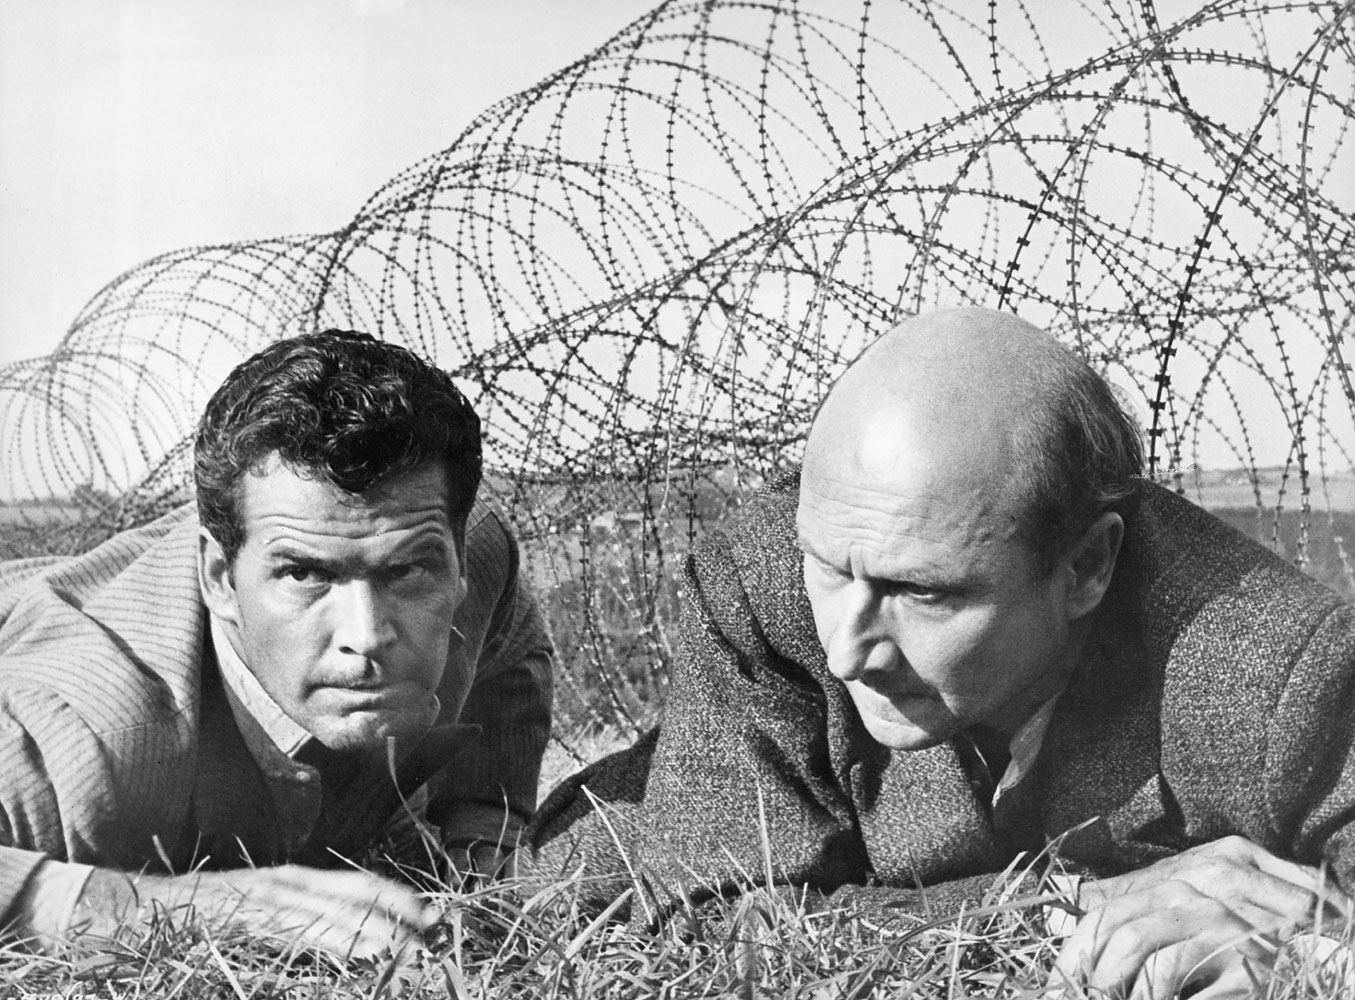 James Garner And Donald Pleasance In 'The Great Escape'